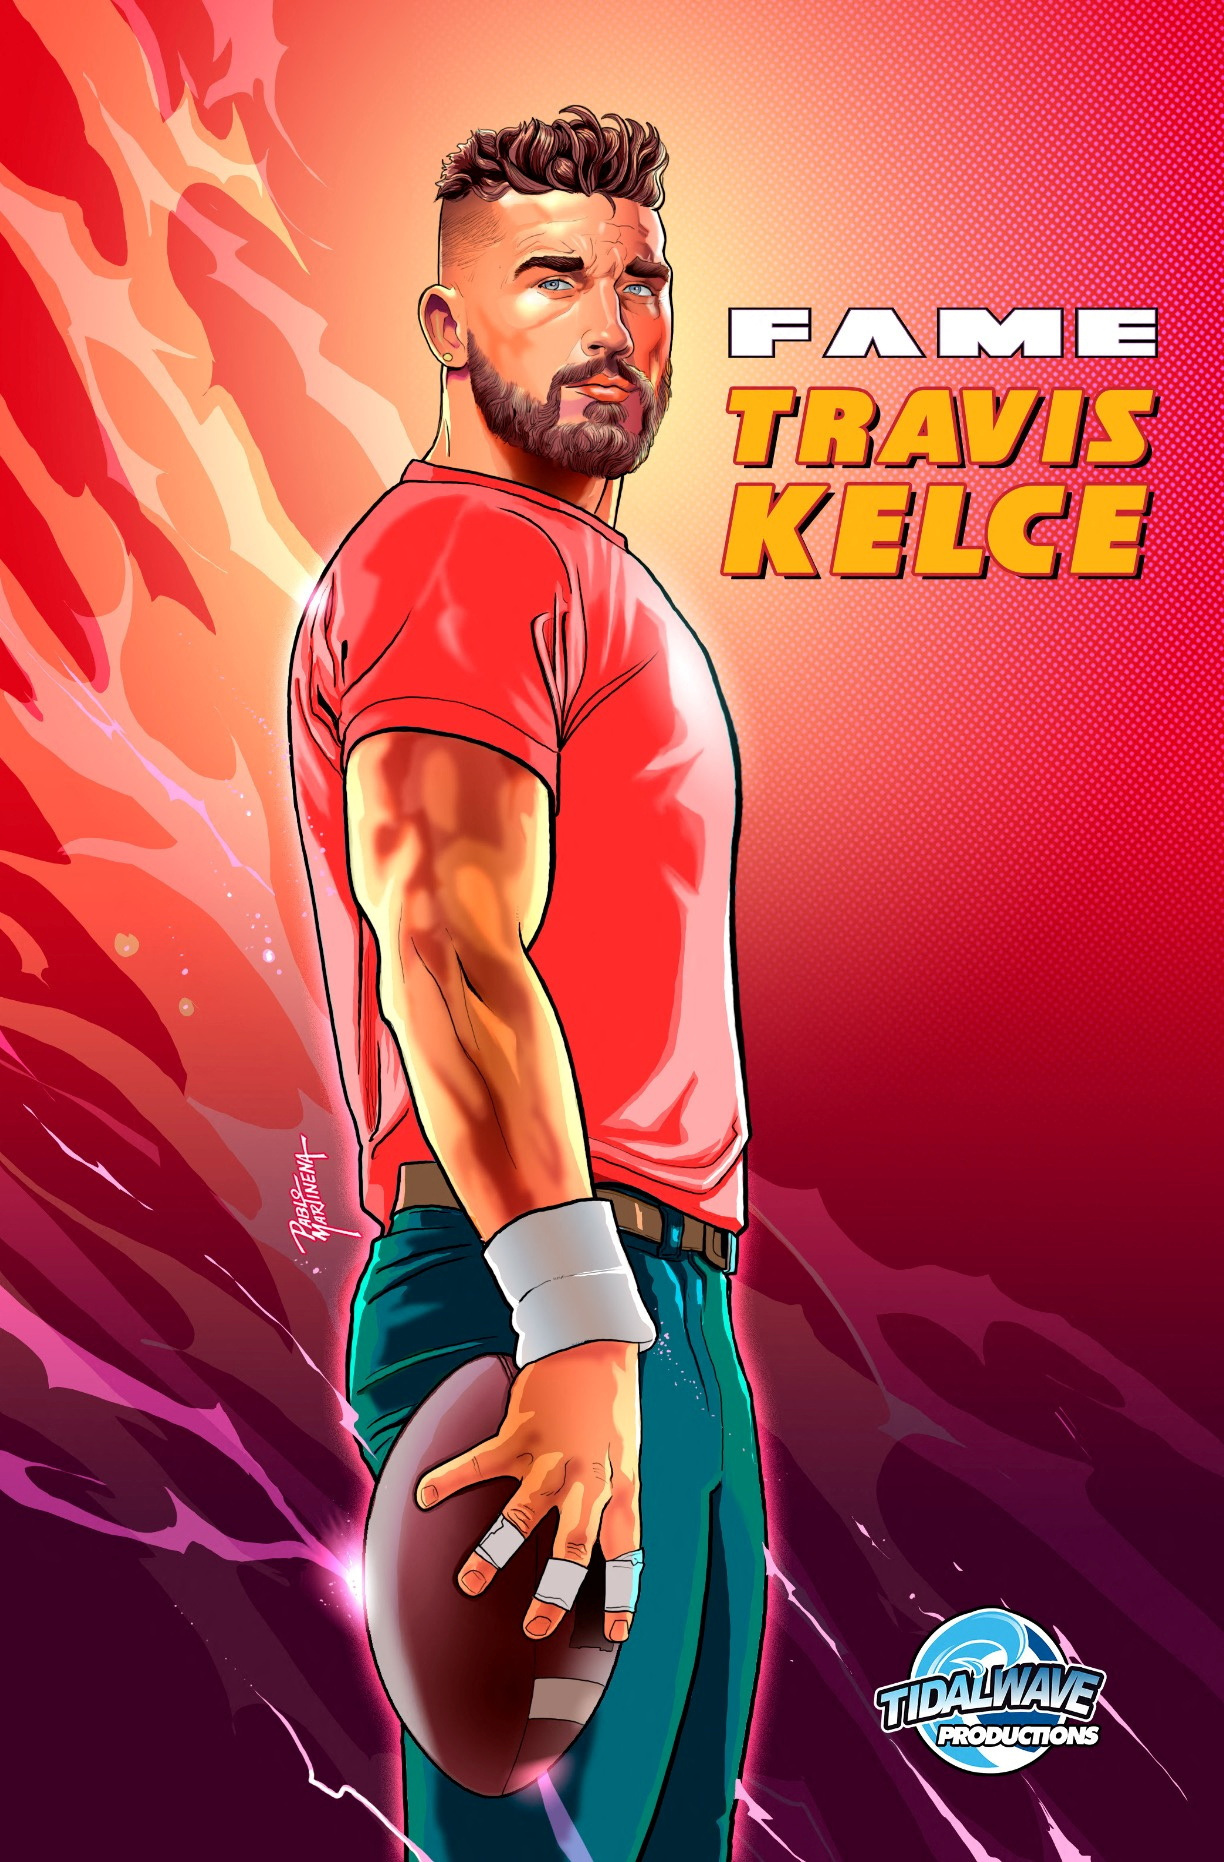 New comic book highlights the life and career of football star Travis Kelce